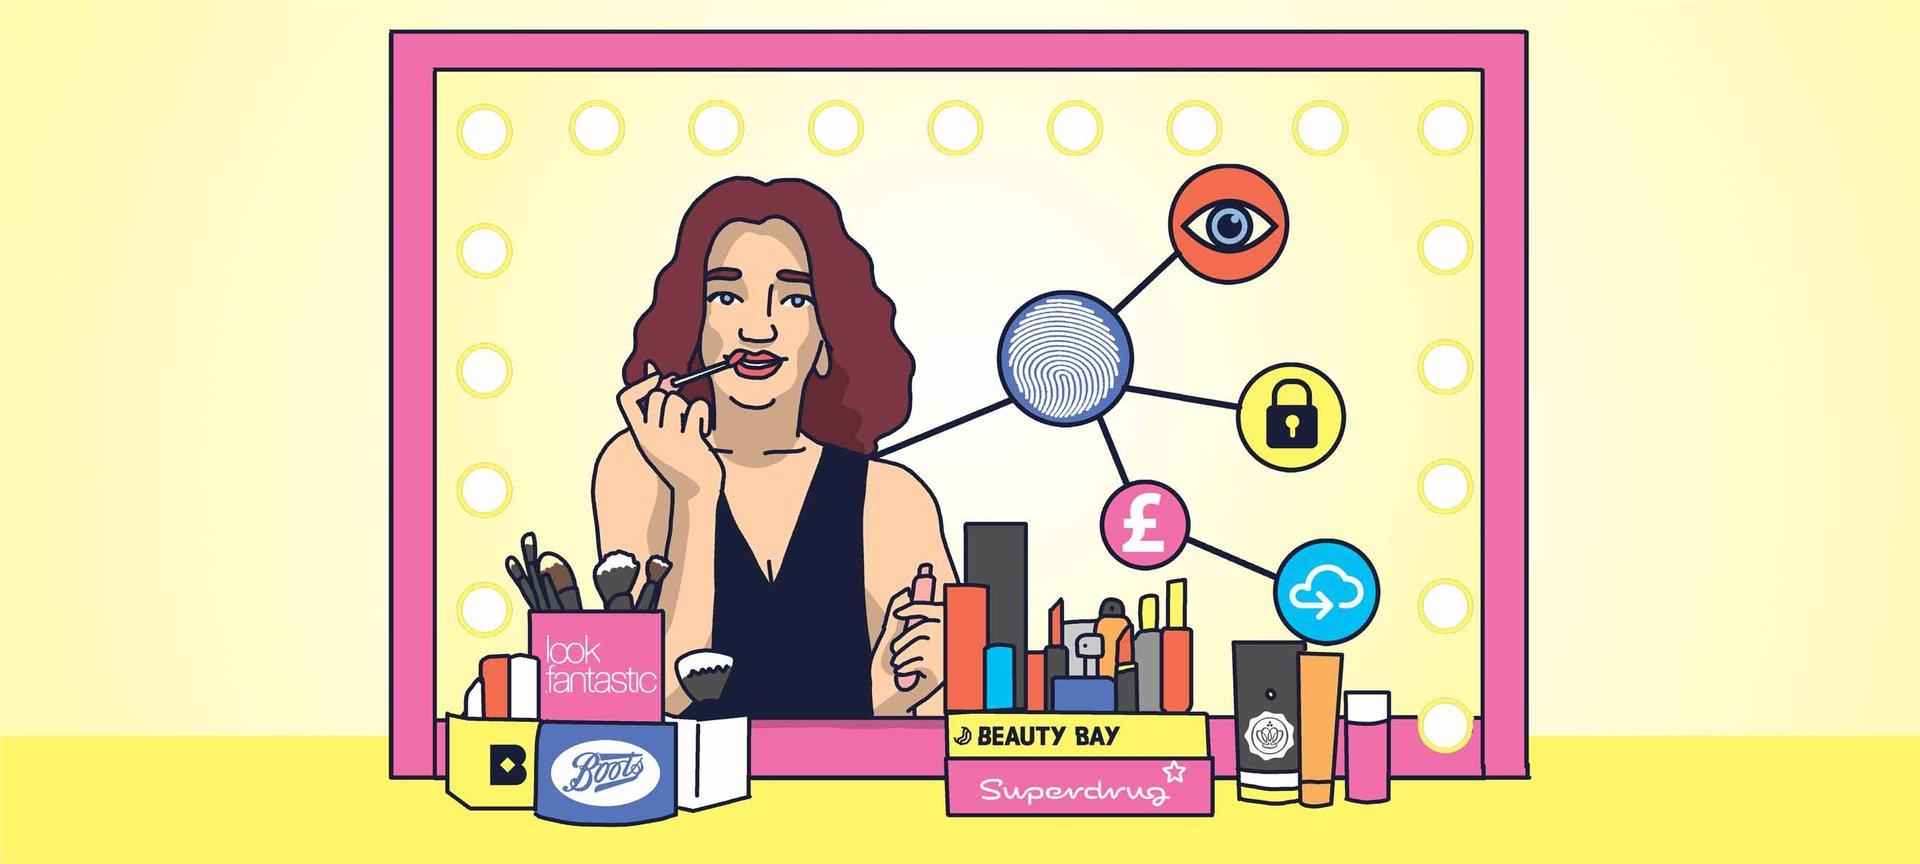 Illustration of a women putting on makeup on her desk, her make up products are being held by containers with top beauty cosmetic brands logos on them. Whilst she puts her make up on the containers are storing her personal data